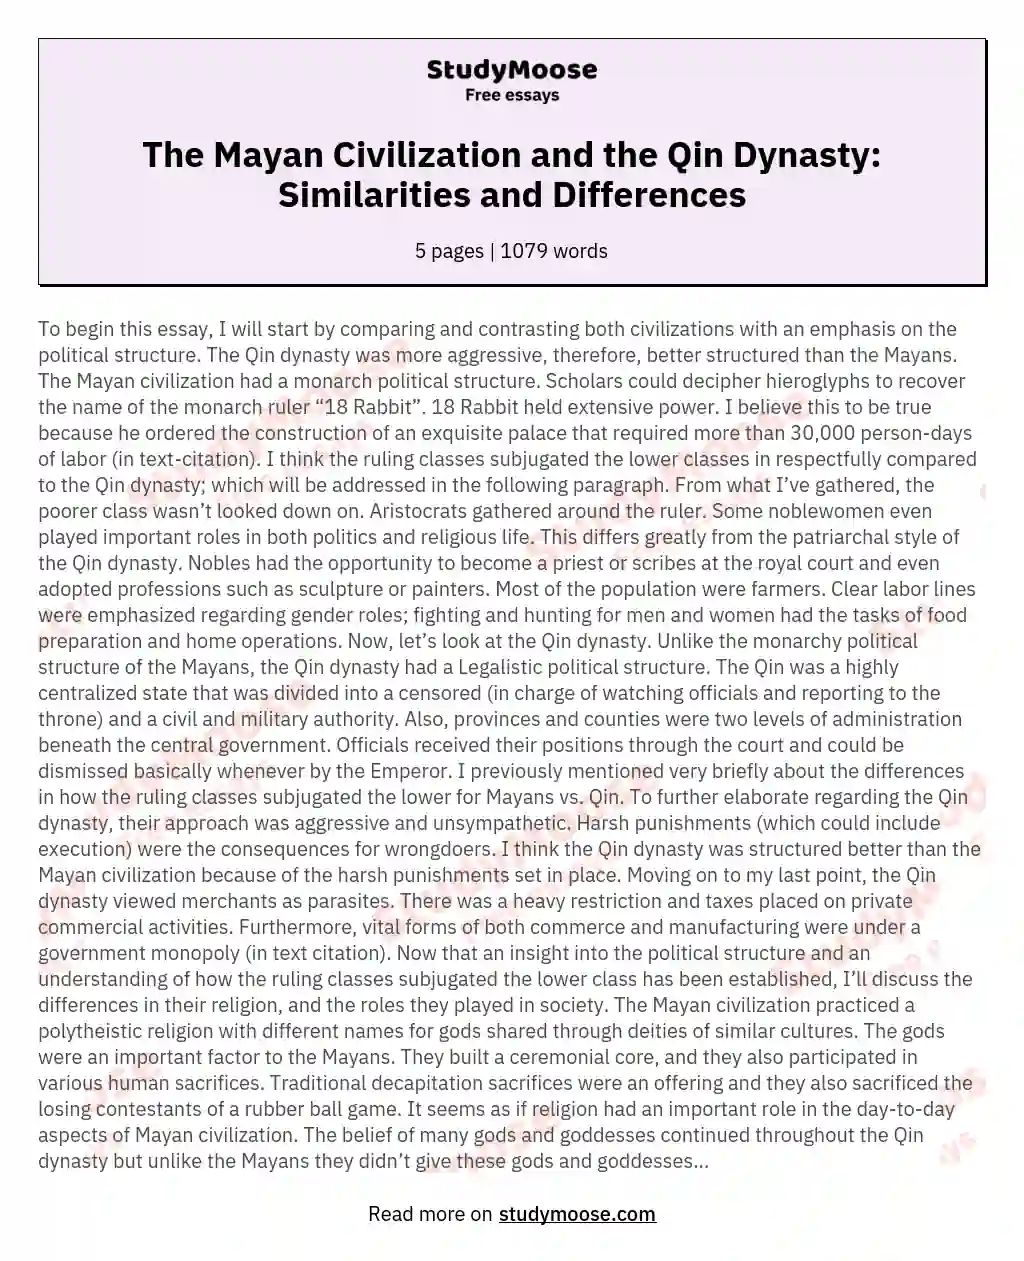 The Mayan Civilization and the Qin Dynasty: Similarities and Differences